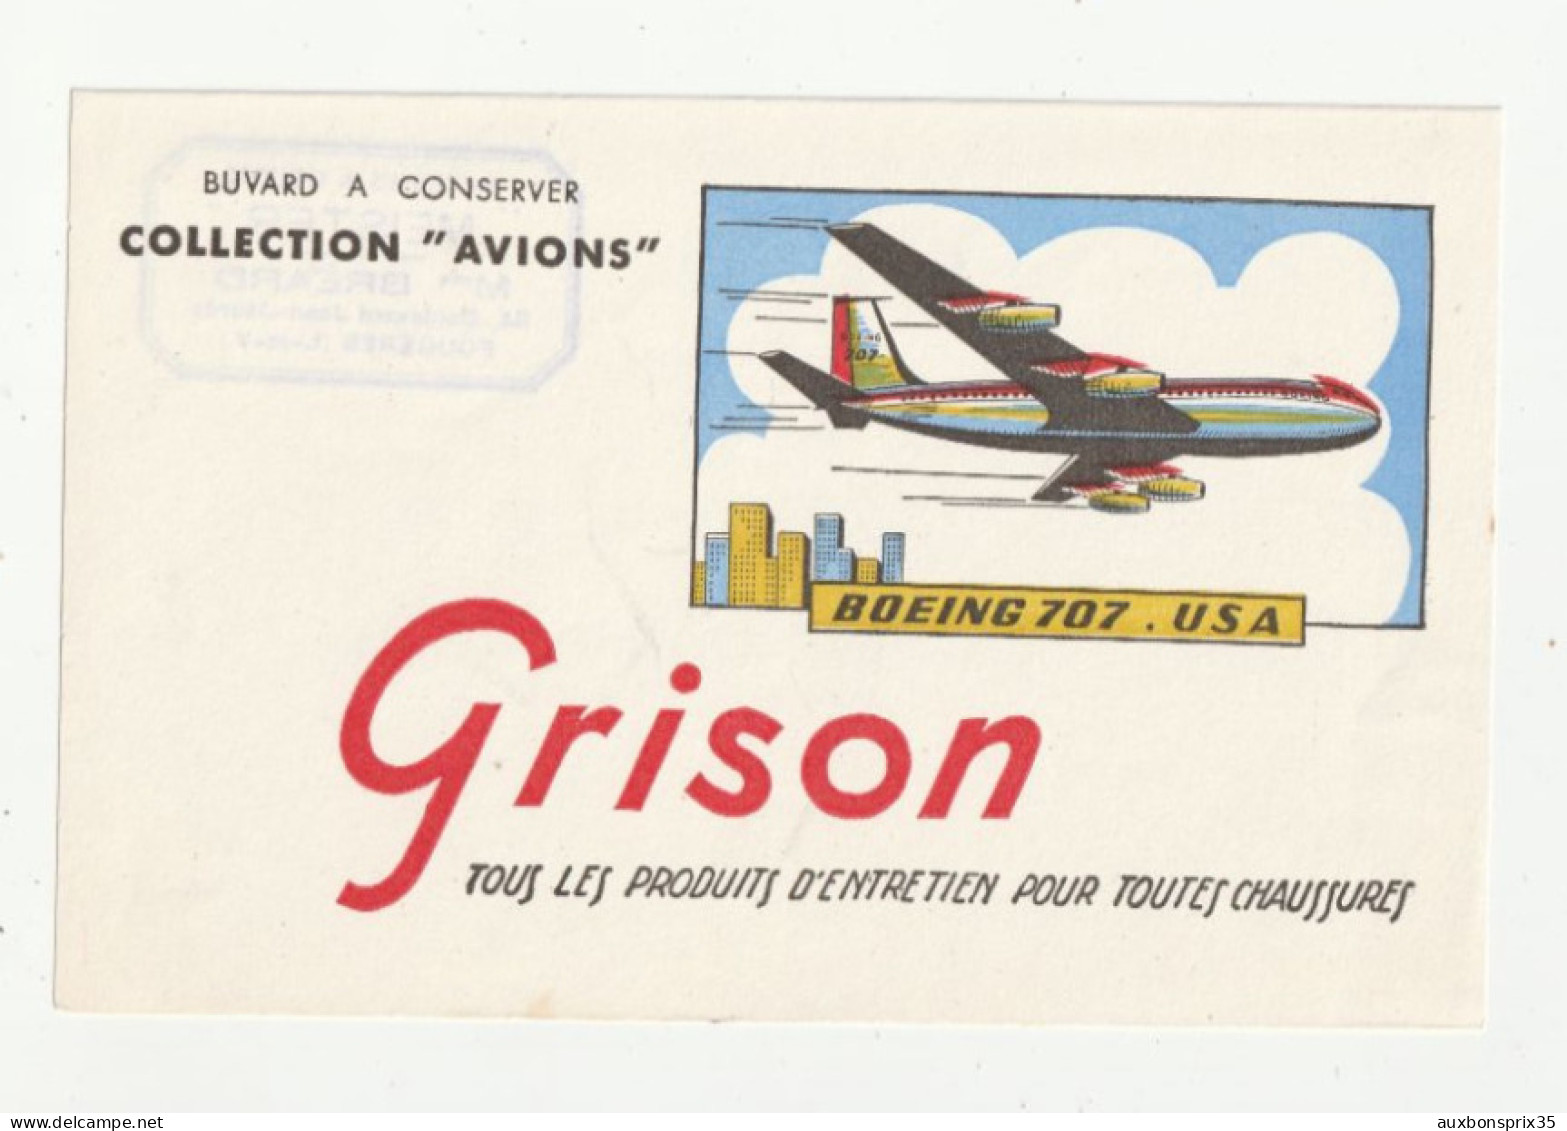 BUVARD - GRISON - COLLECTION AVIONS - BOEING 707 - (TAMPON DOS MEISTER MACHINE A COUDRE FOUGERES) 35 - Scarpe